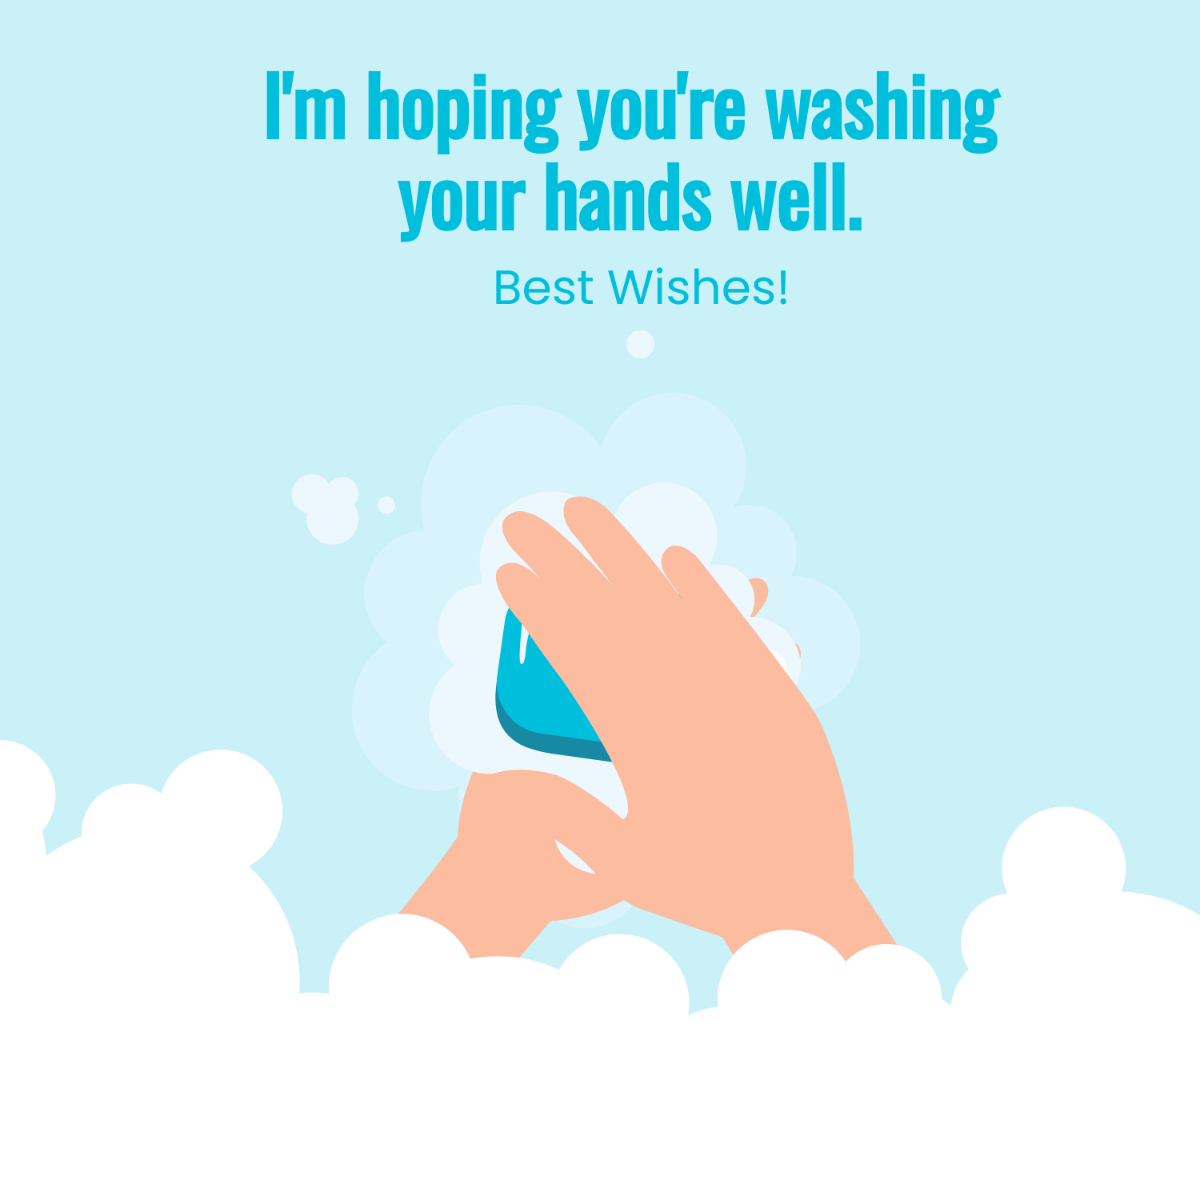 Free Global Handwashing Day Wishes Vector Template